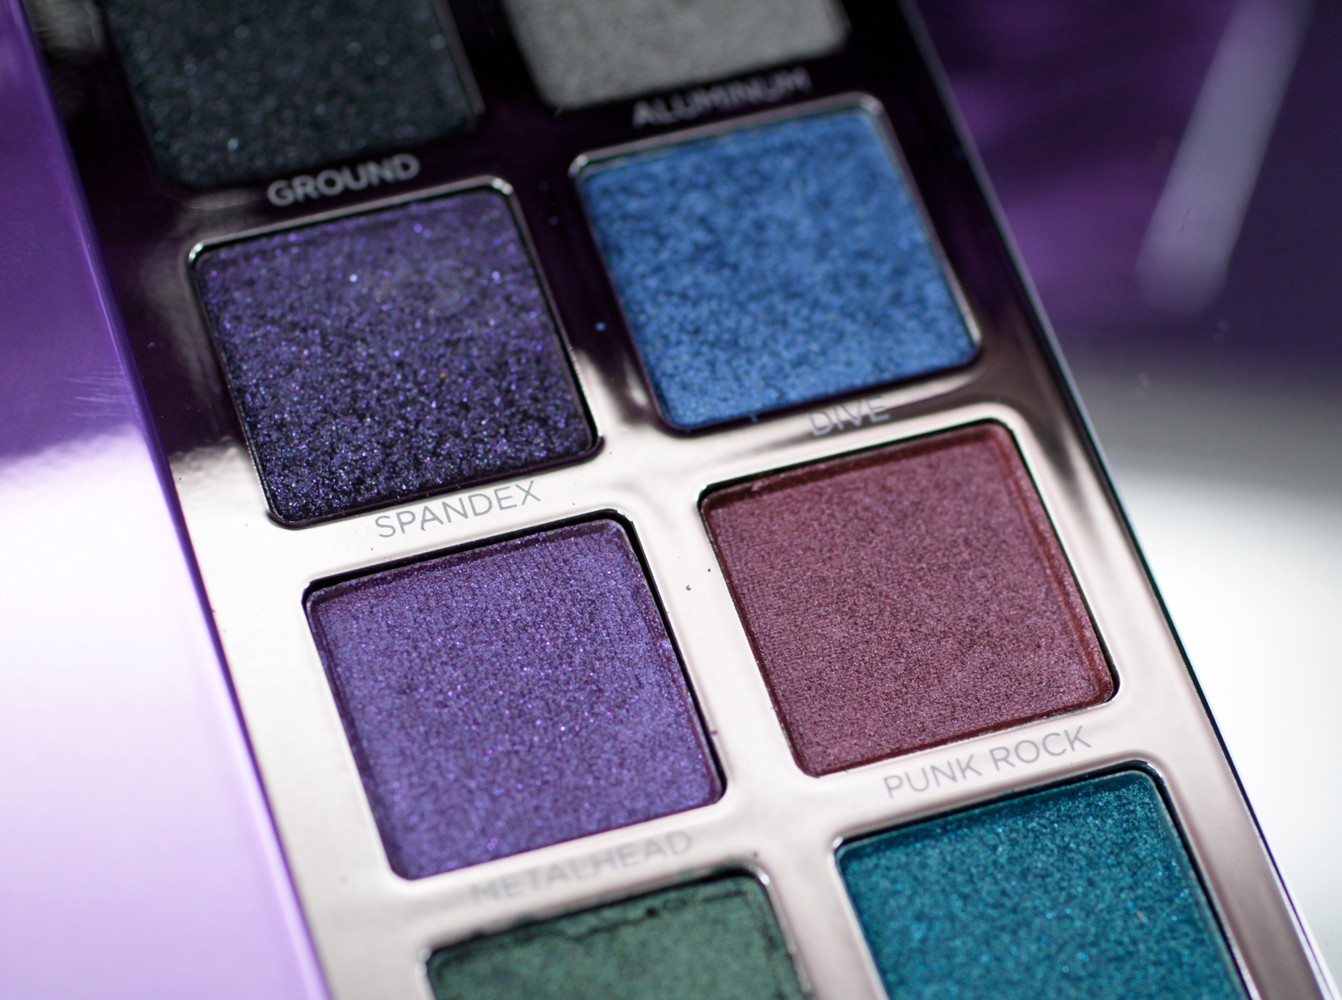 Urban Decay Heavy Metals Eyeshadow Palette - Spandex Dive Metalhead Punkrock  - Urban Decay Heavy Metals Palette review by popular Los Angeles cruelty free beauty blogger My Beauty Bunny